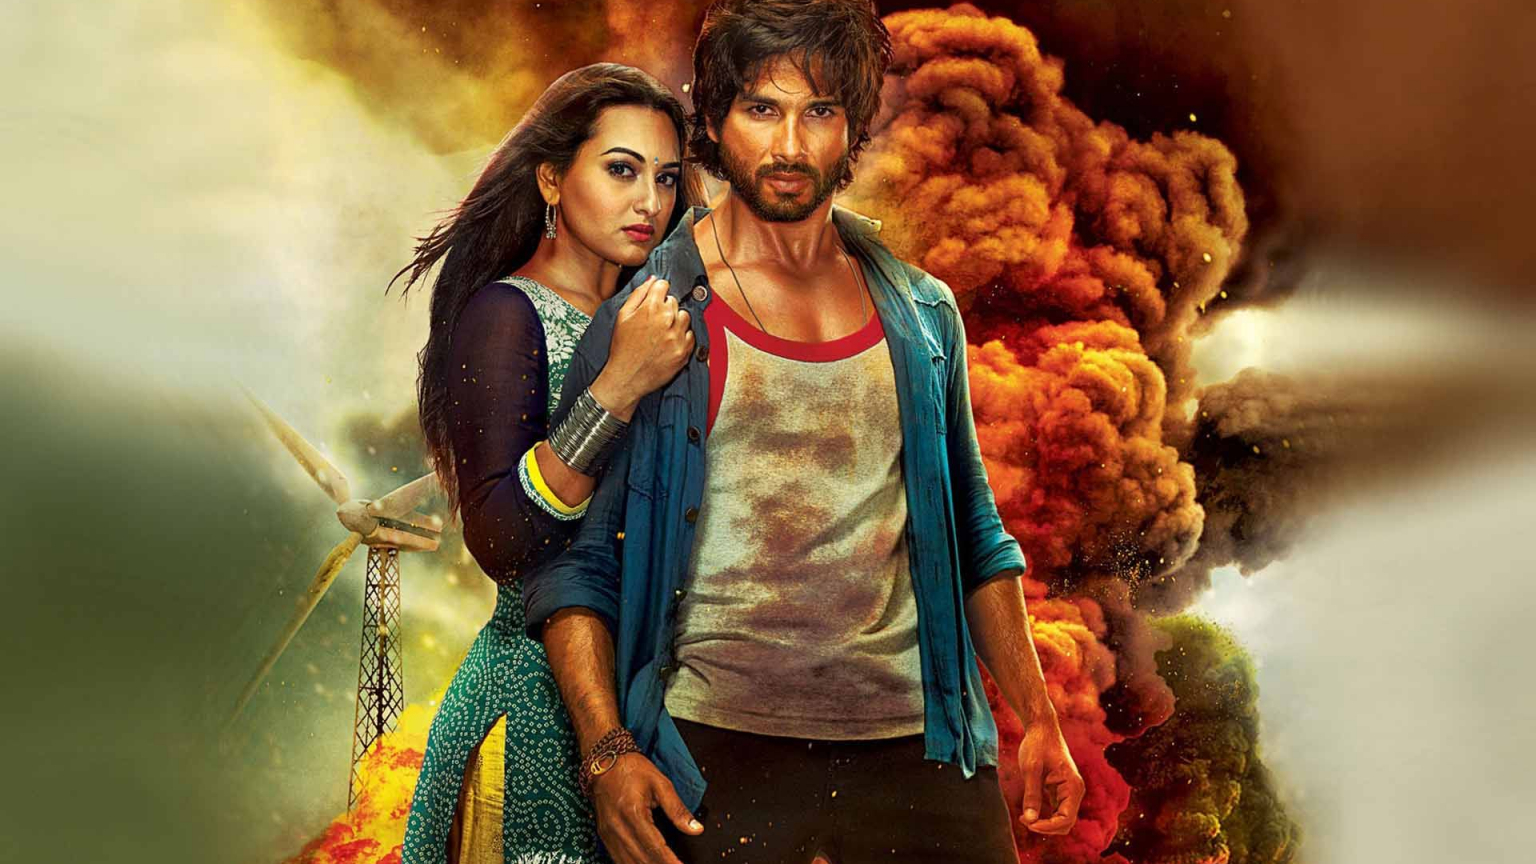 Free download R Rajkumar Official Poster HD Bollywood Movies Wallpaper for [1920x1200] for your Desktop, Mobile & Tablet. Explore Bollywood Movies Wallpaper. Bollywood Movies Wallpaper, Movies Wallpaper, Wallpaper Movies